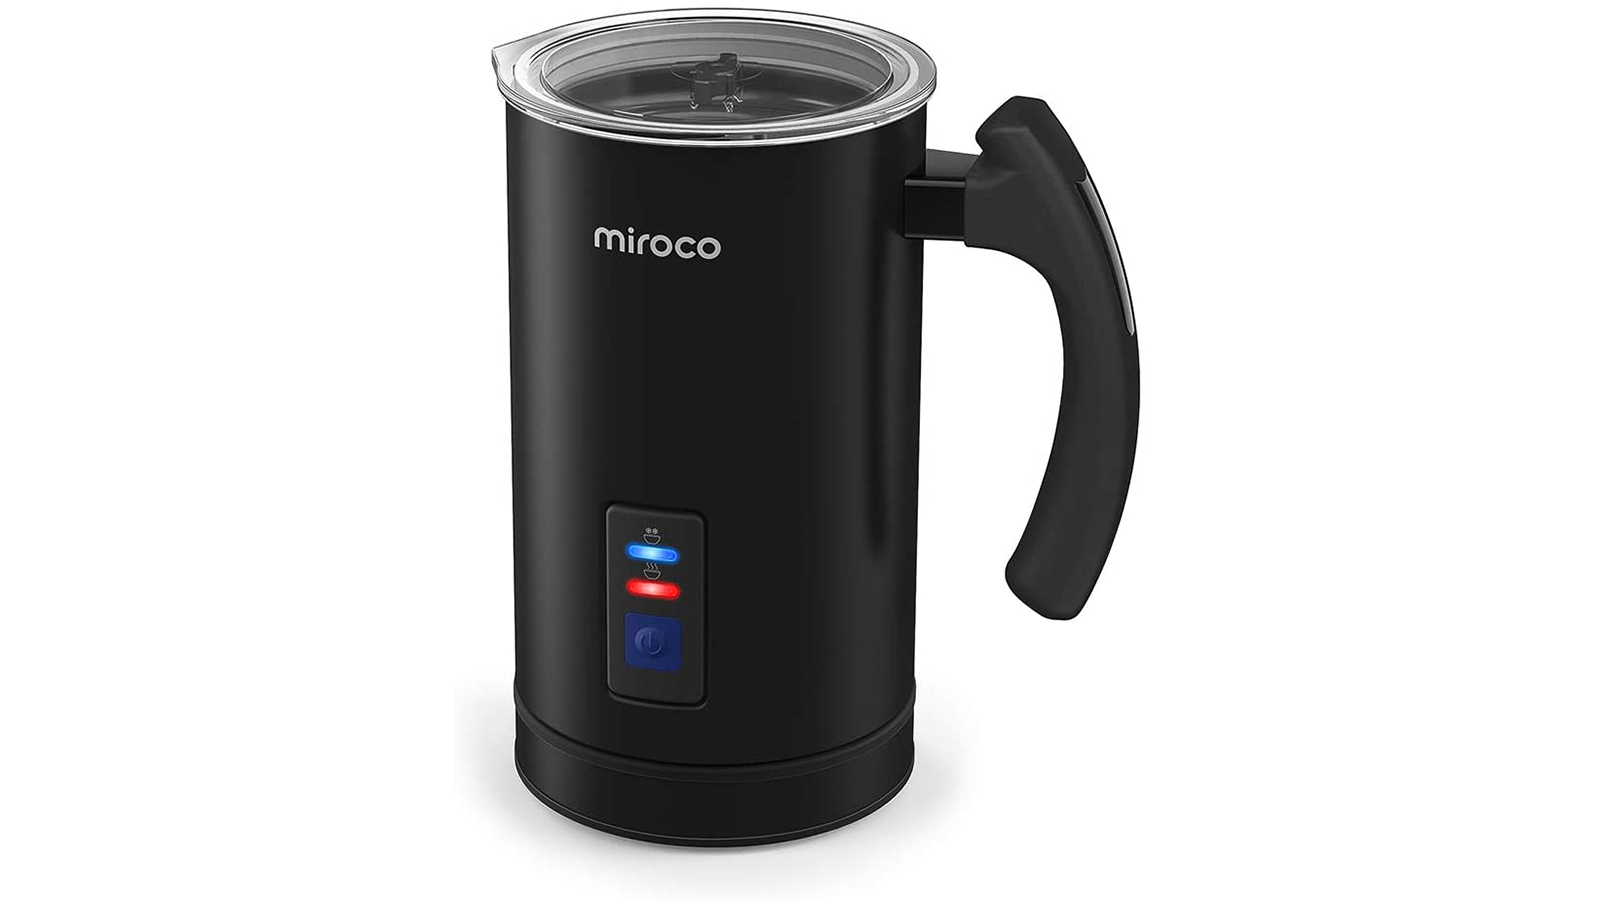 The Miroco milk frother makes coffee-shop style coffee and hot